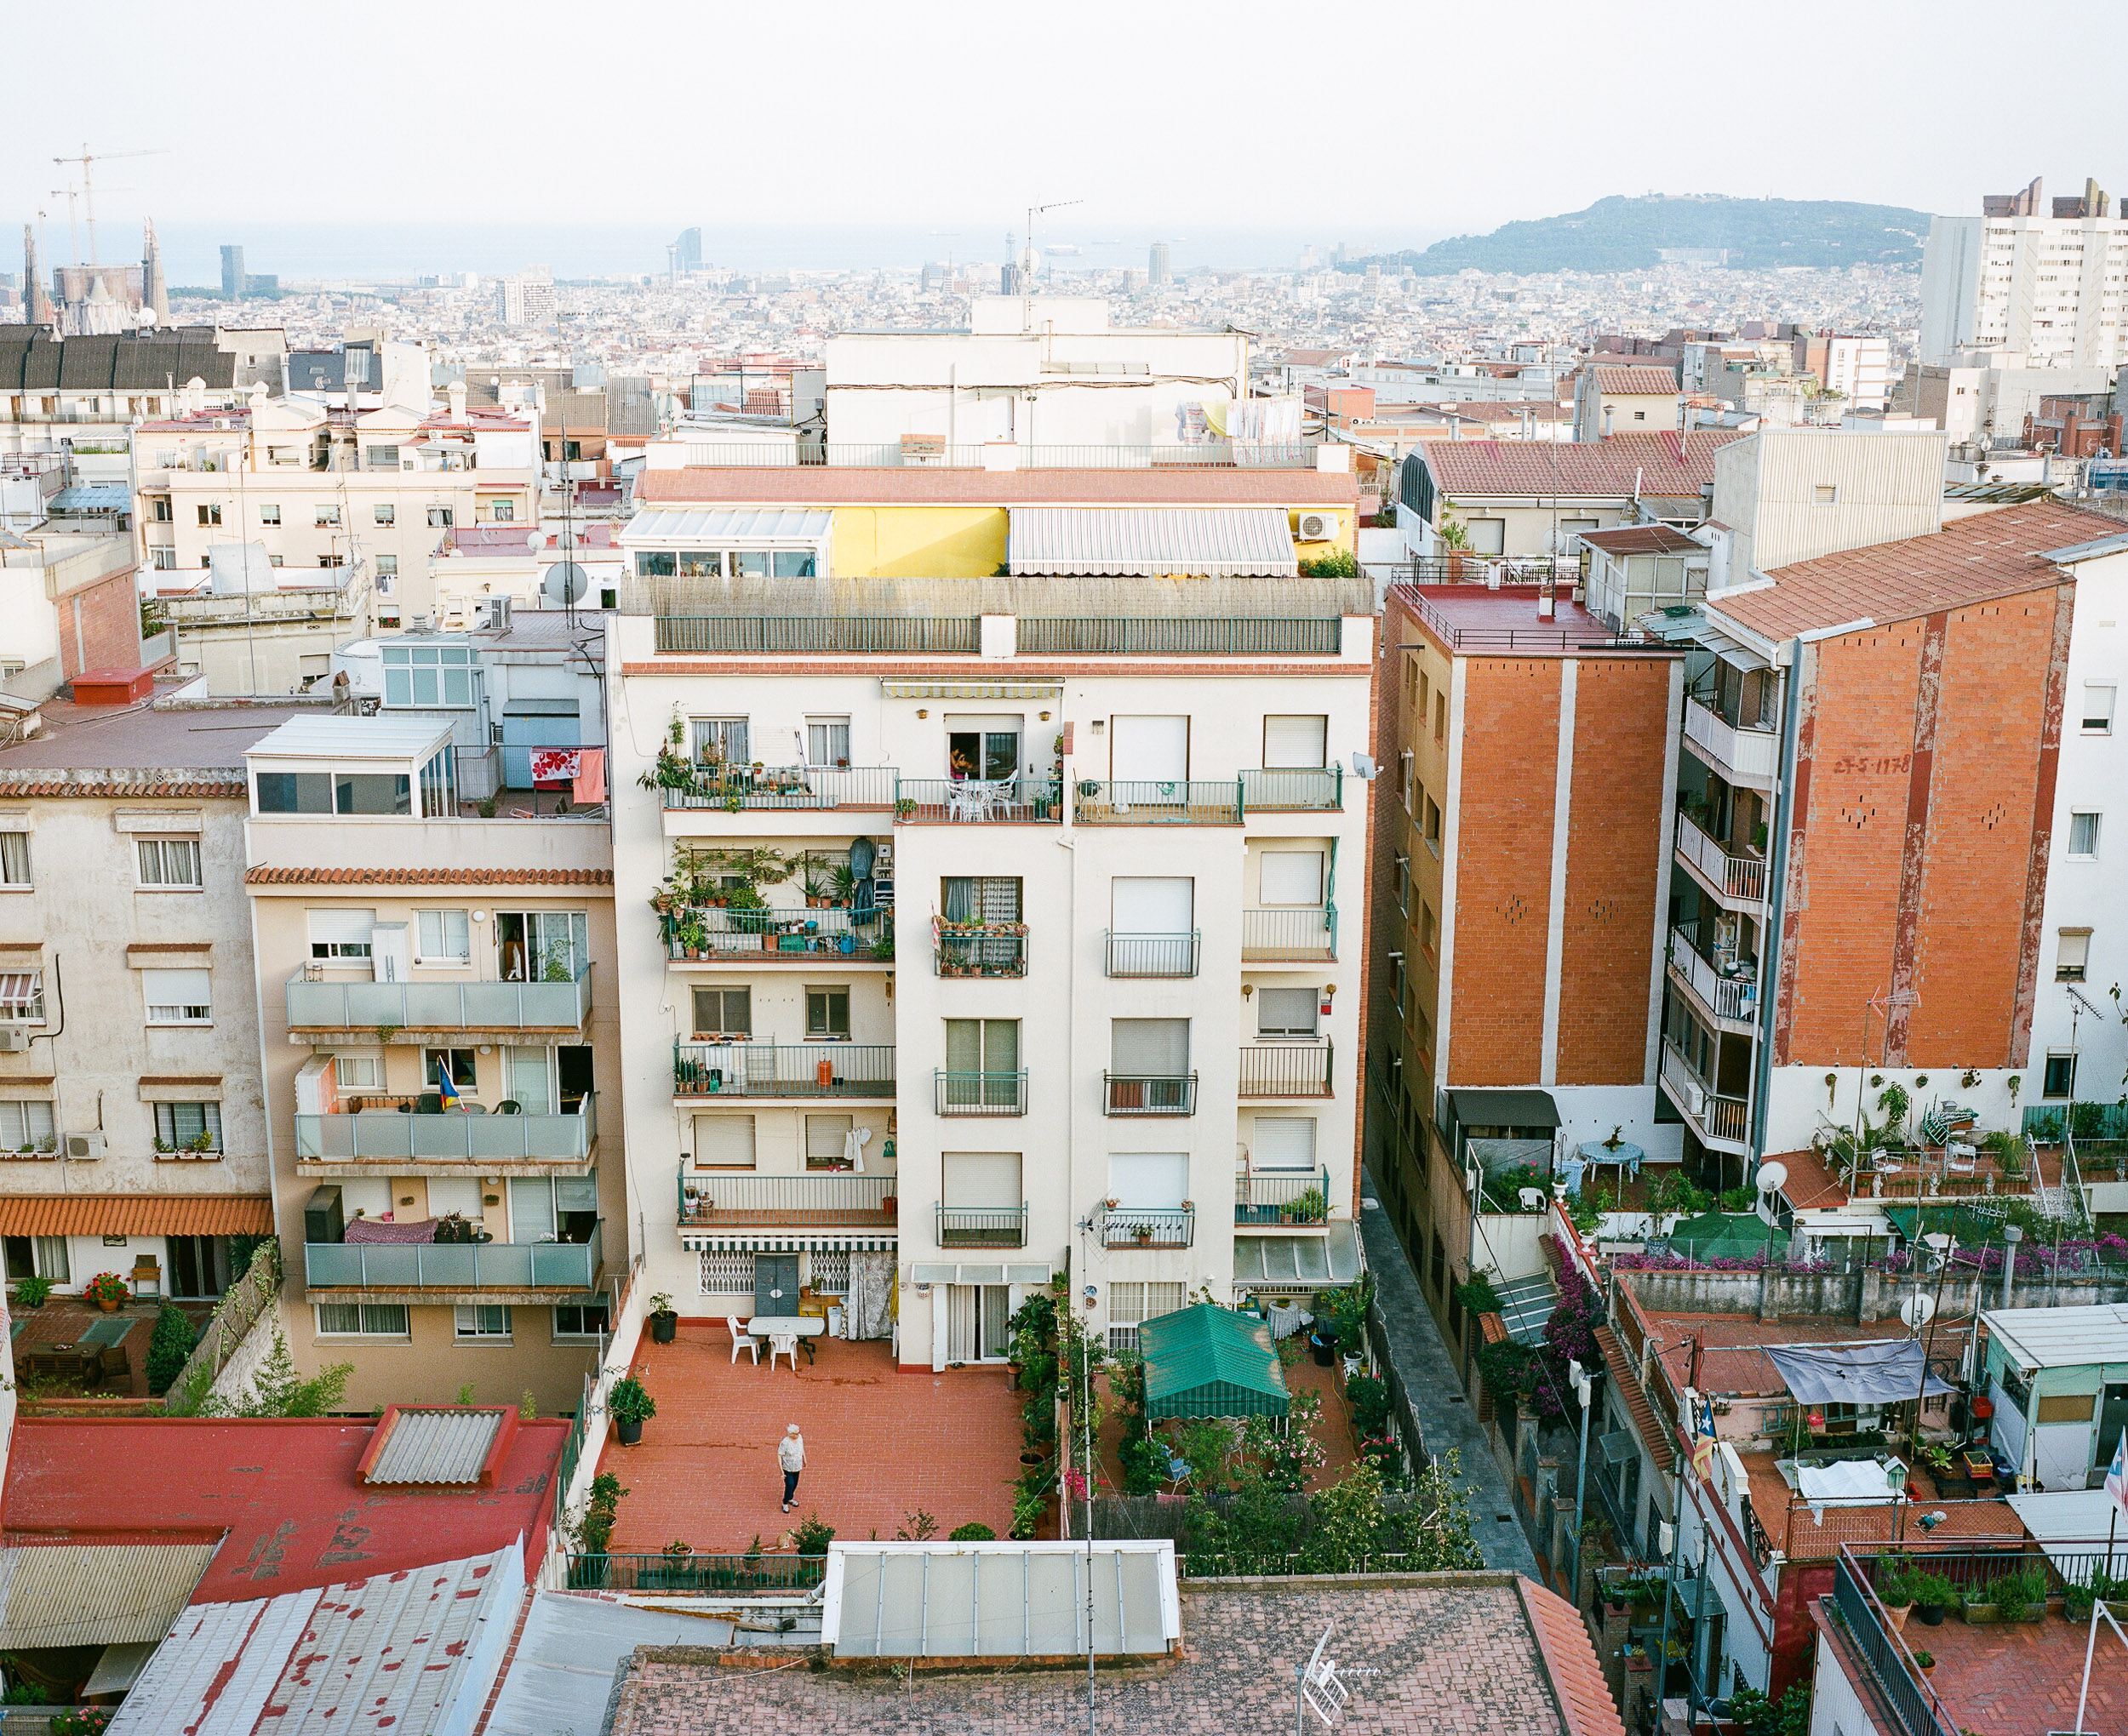 Rooftop view in Barcelona, Spain- Man on rooftop